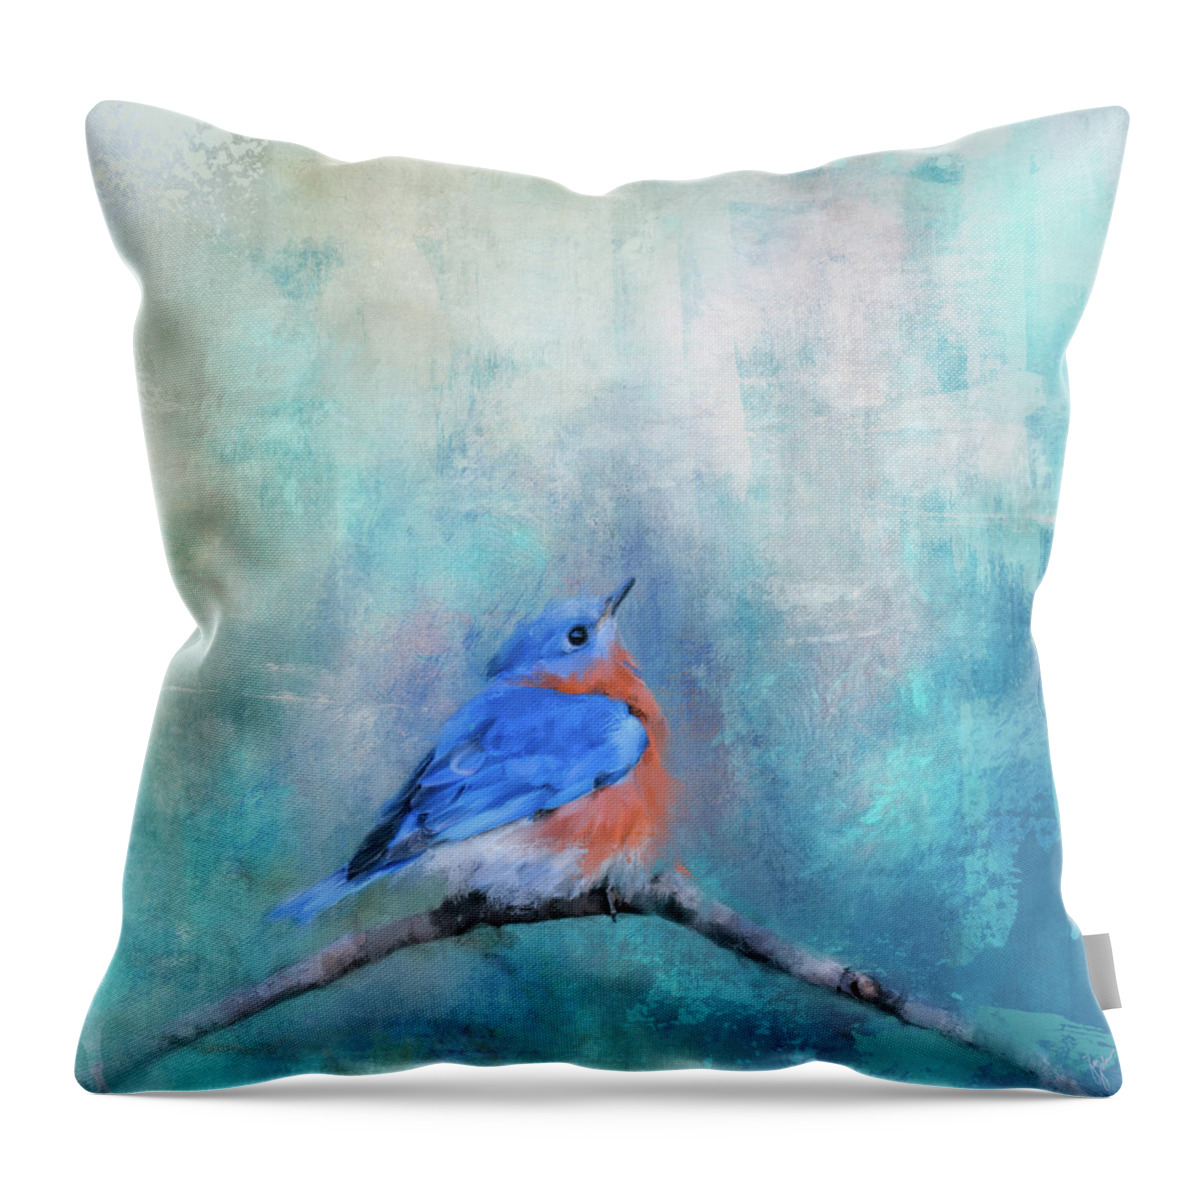 Colorful Throw Pillow featuring the painting Little Boy Blue by Jai Johnson